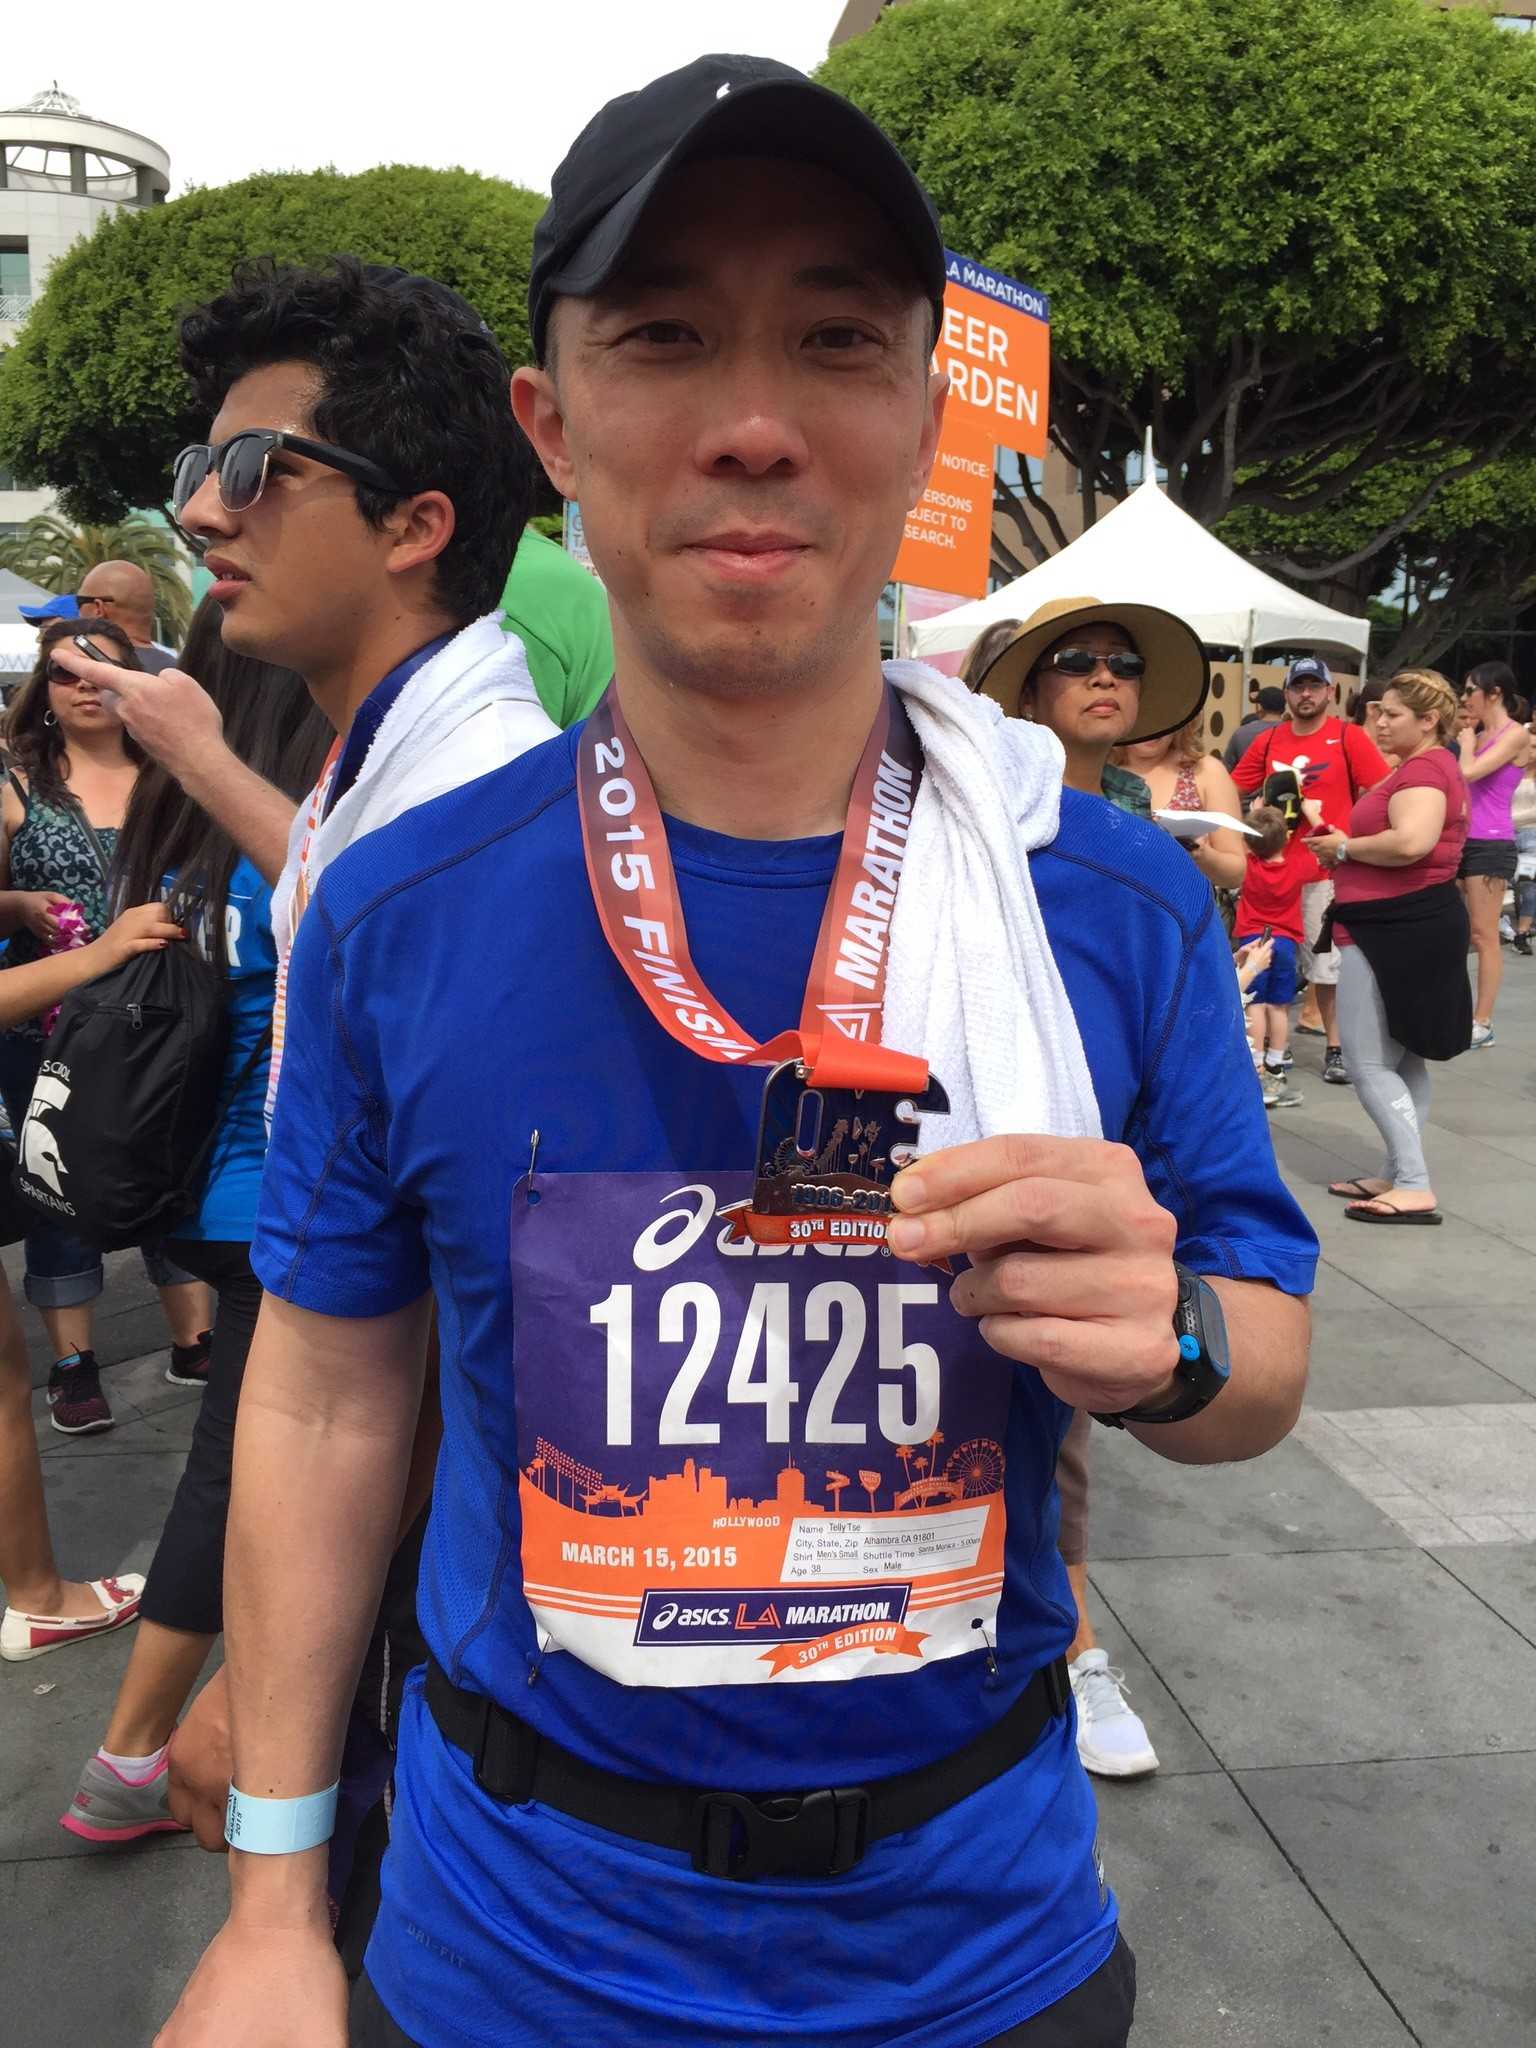 Tse poses with his medal after the race. Photo by: TONIA TSE